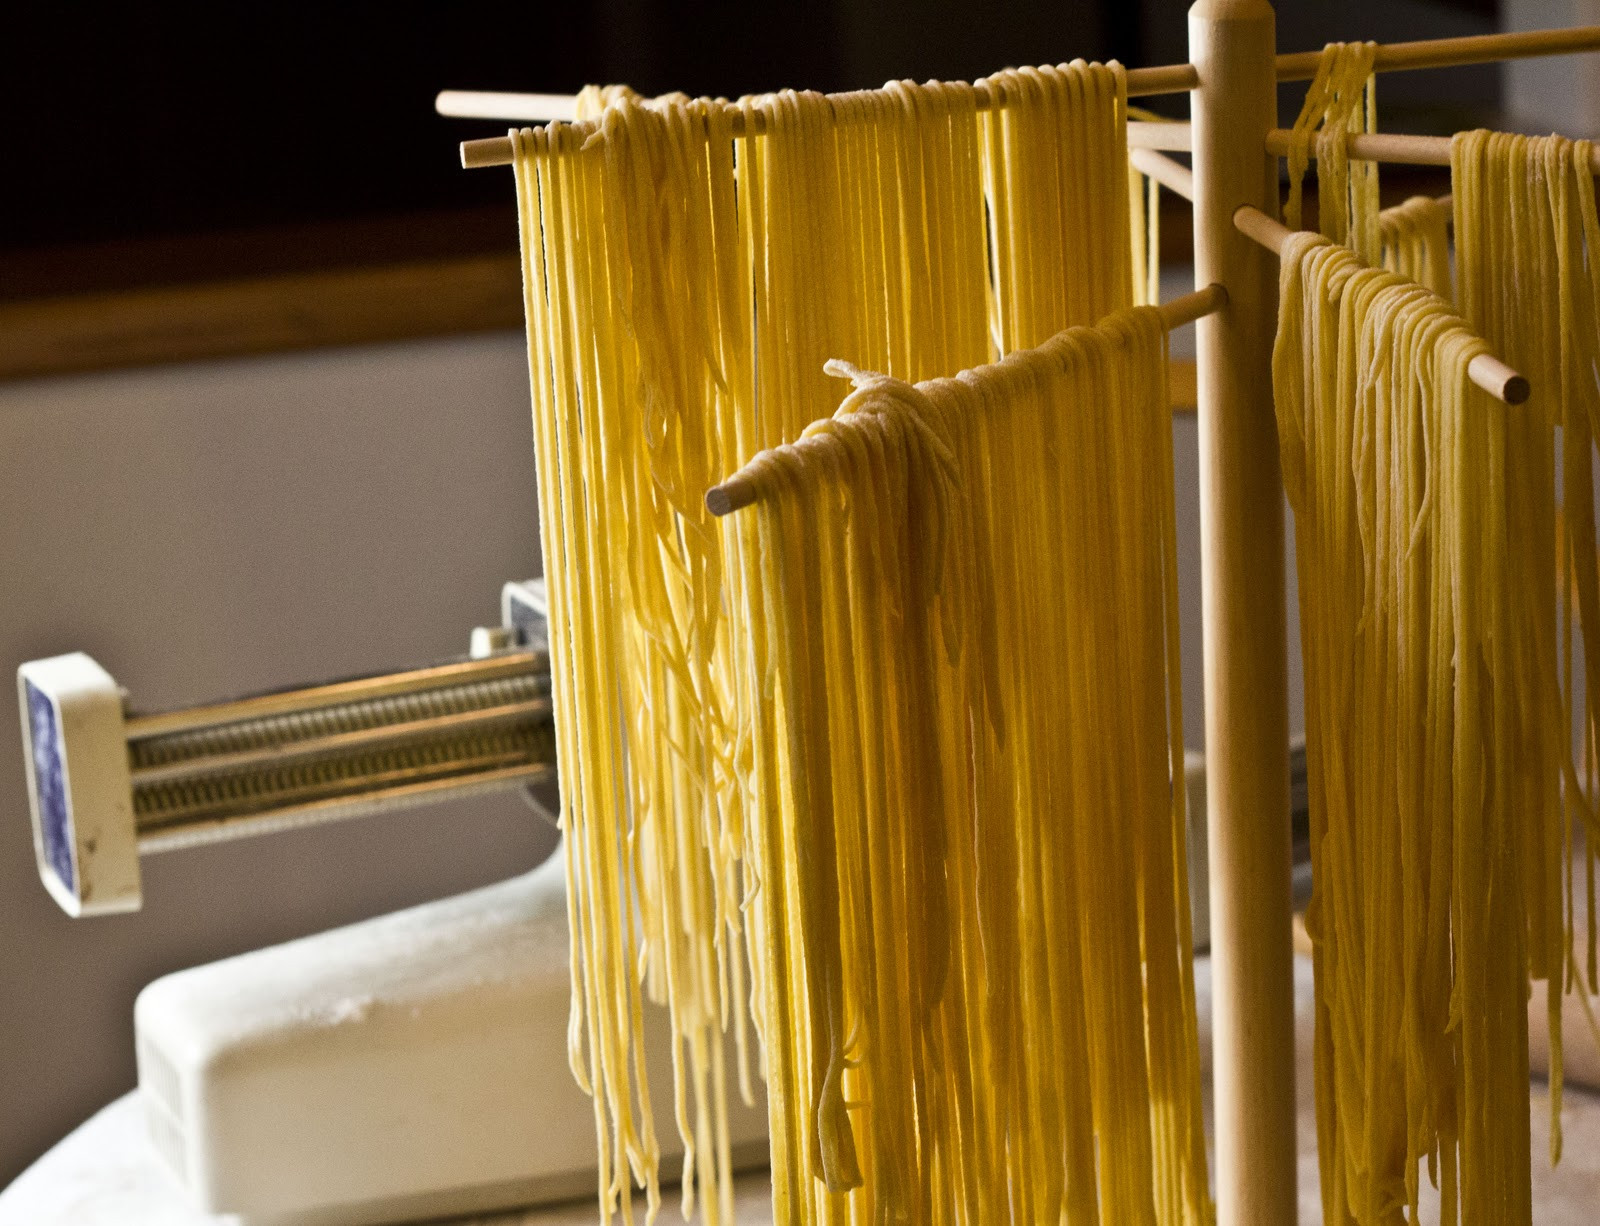 Drying Homemade Pasta
 The Colors Indian Cooking How To Make Fresh Pasta